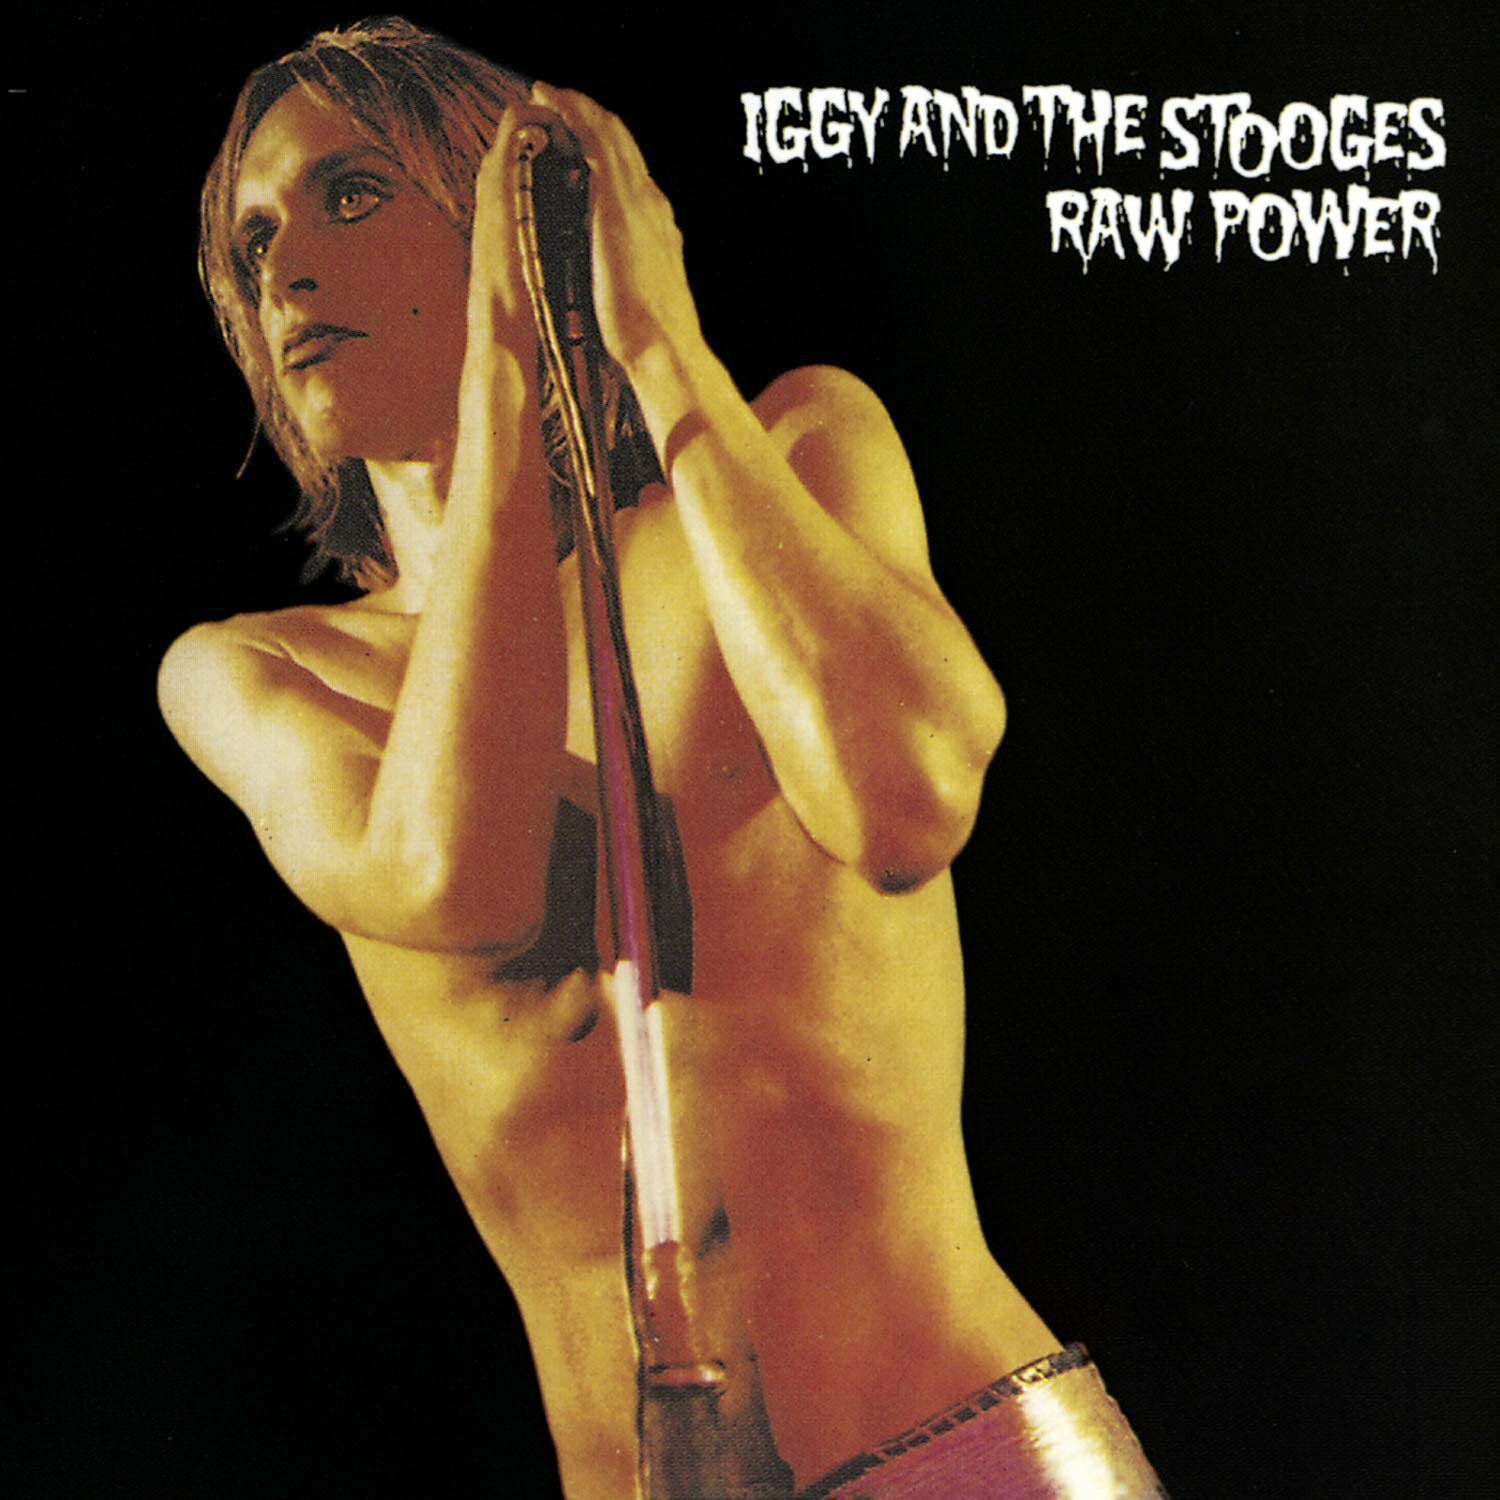 Iggy Pop & The Stooges: „RAW POWER”